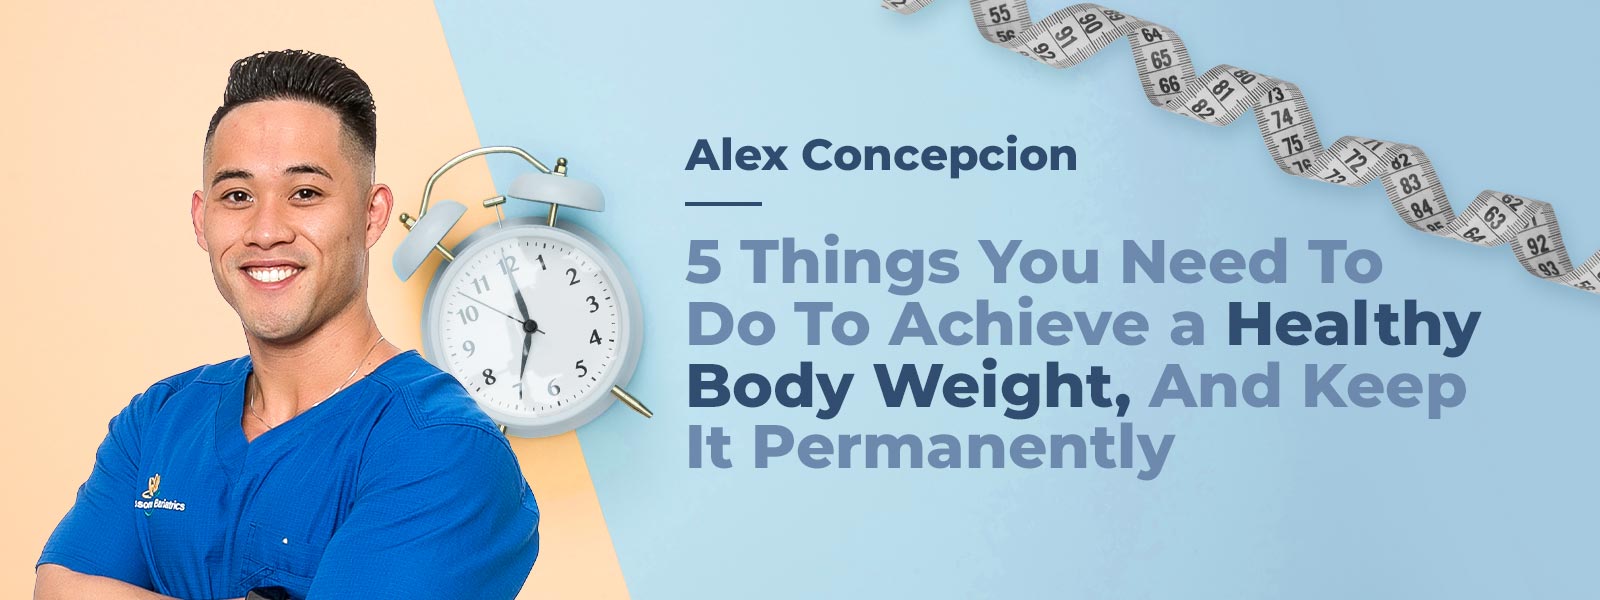 Alex Concepcion of Blossom Bariatrics On The 5 Things You Need To Do To Achieve a Healthy Body Weight, And Keep It Permanently